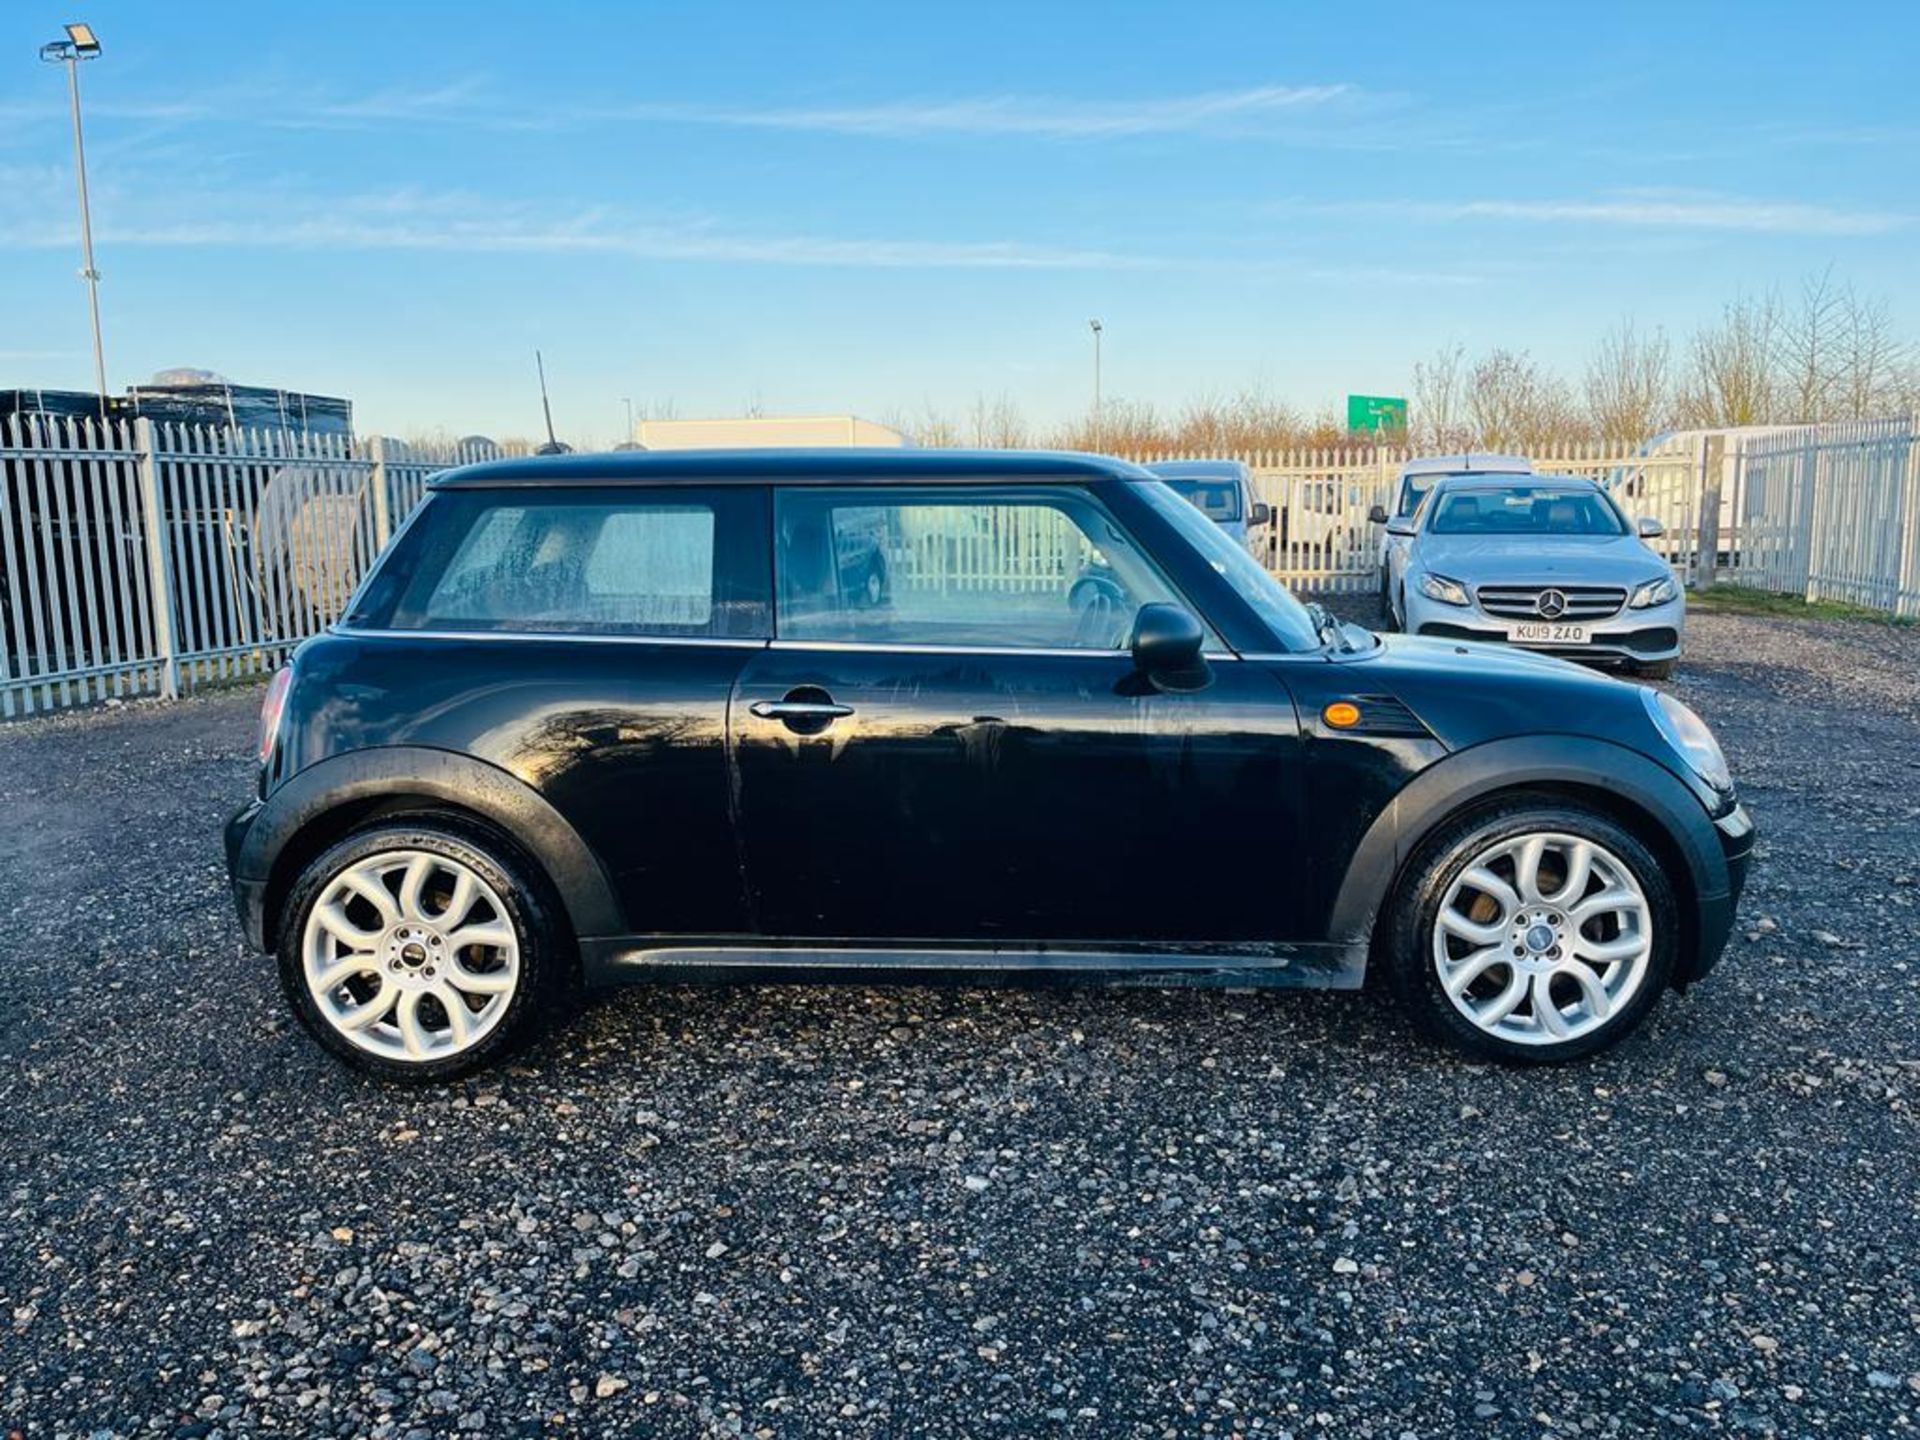 ** ON SALE ** Mini One 1.6 Start/Stop 100 2010 '10 Reg' ' Very Economical' Only 108,430 - No Vat - Image 10 of 26